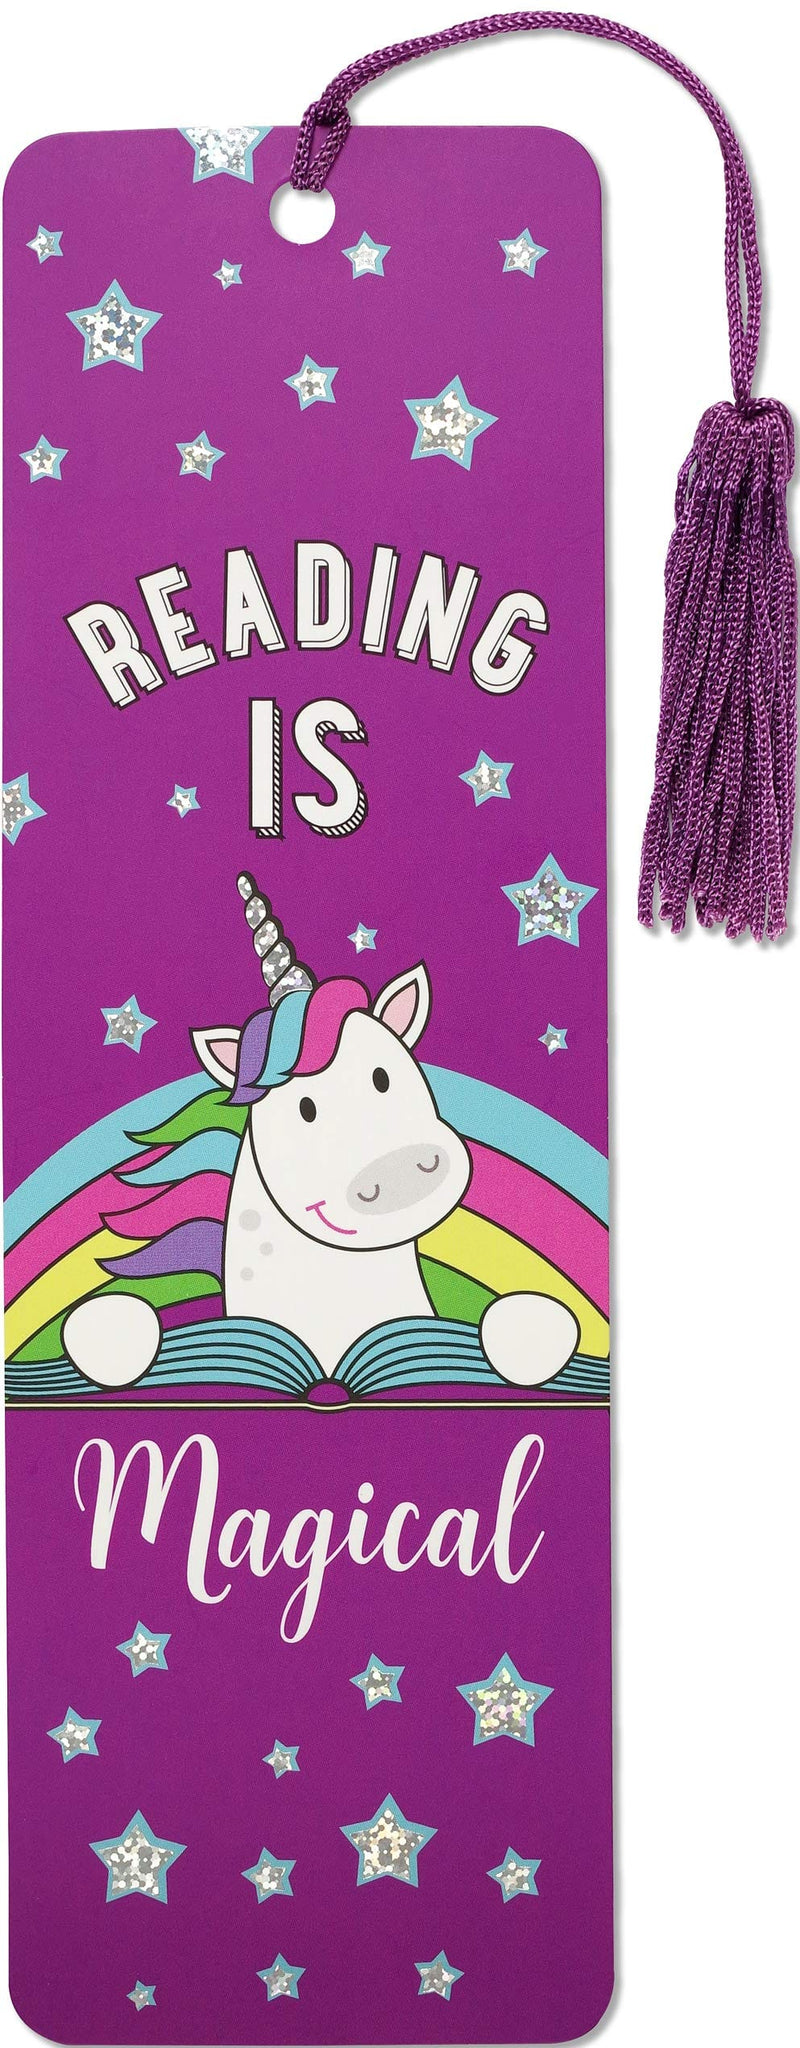 Reading is Magical Bookmark - Shelburne Country Store